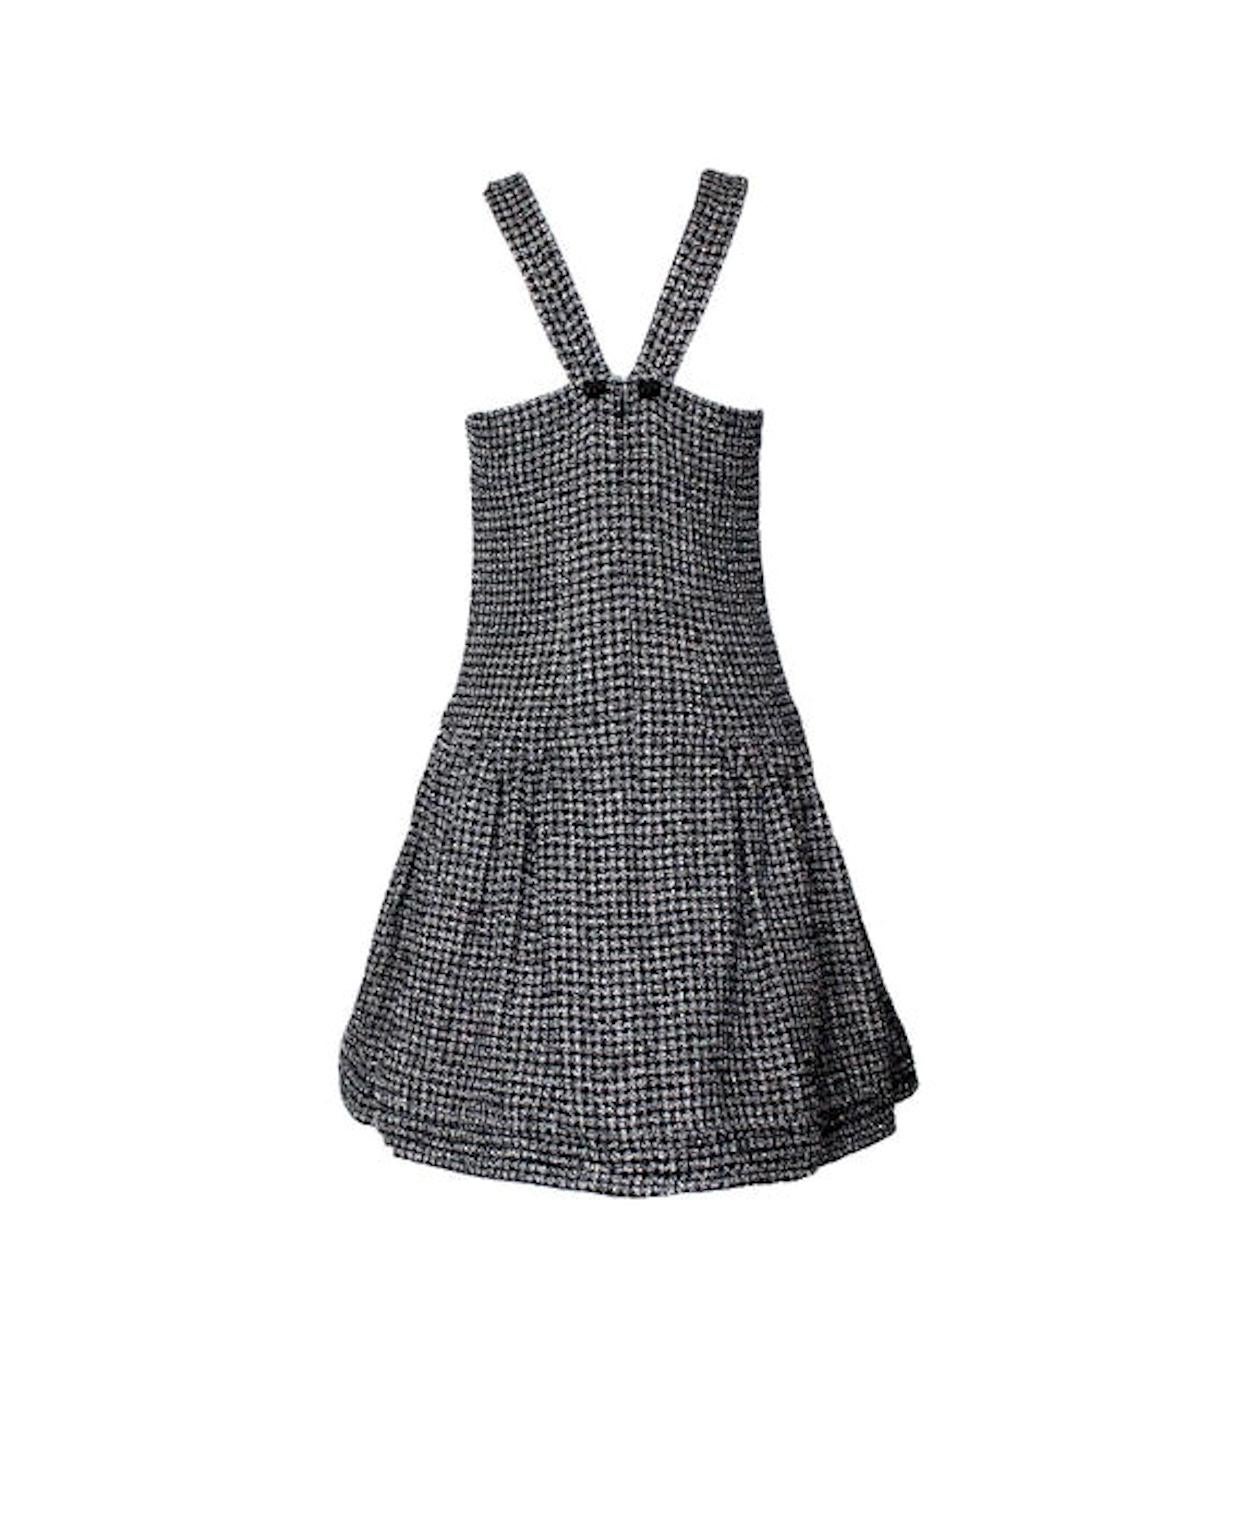 Amazing dress by Chanel
Made of exquisite tweed fabric produced by Maison Lesage for Chanel
Dress features a round neck and wide skirt with pleats
Two hidden pockets
Decorative back with two classy CC logo buttons
Fully lined with CC logo silk
Size